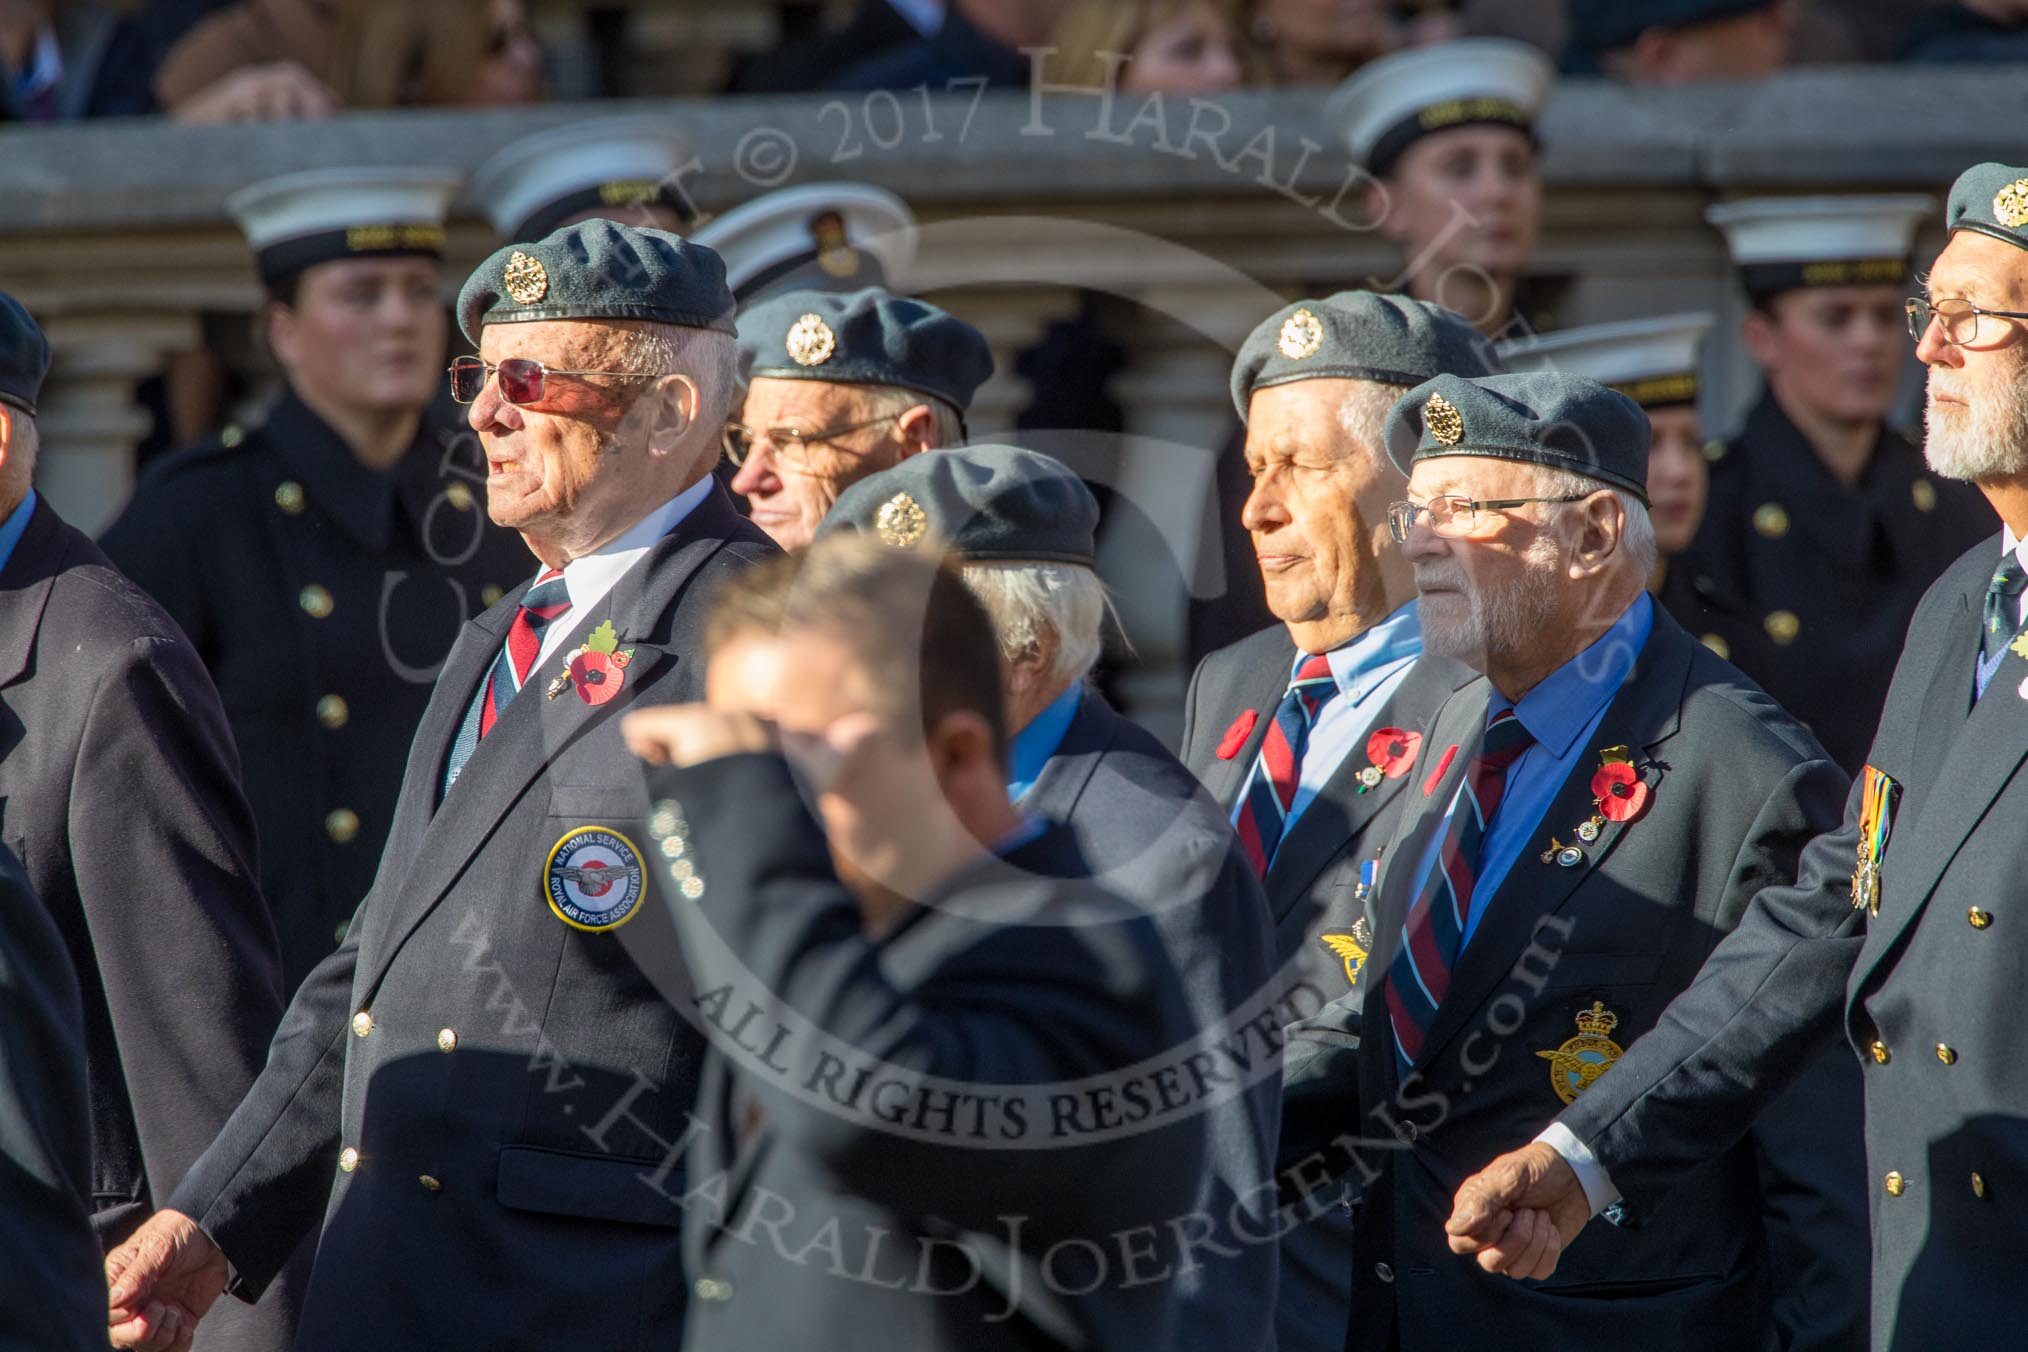 National Service(Royal Air Force)Association (NS(RAF)A) (Group C5, 39 members) during the Royal British Legion March Past on Remembrance Sunday at the Cenotaph, Whitehall, Westminster, London, 11 November 2018, 12:15